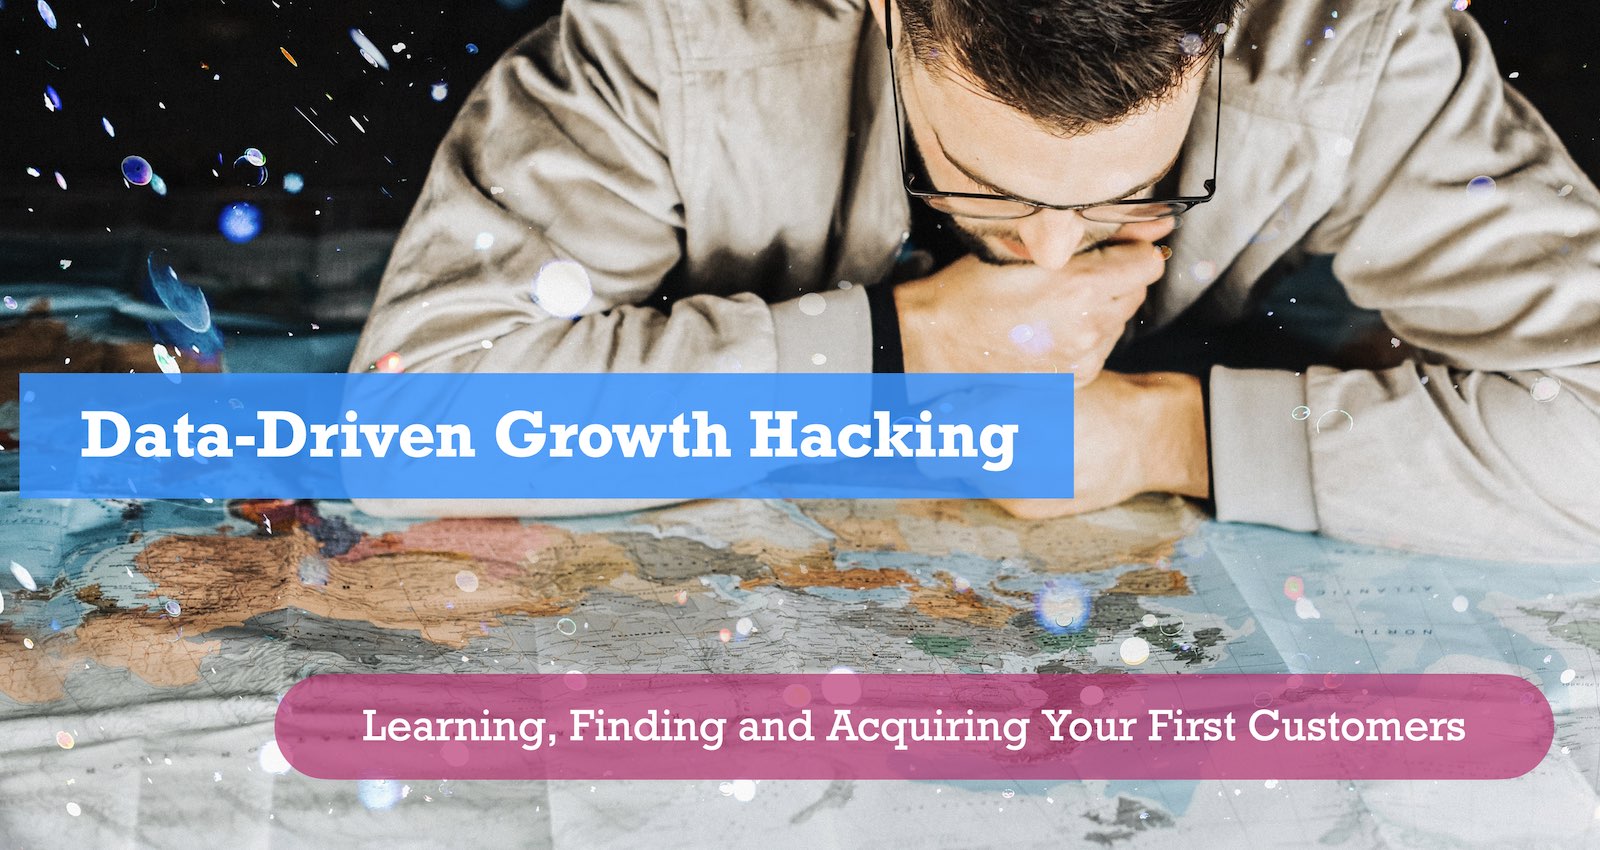 Data-Driven Growth Hacking: An Experimental, Iterative Approach to Finding and Acquiring Your First Customers